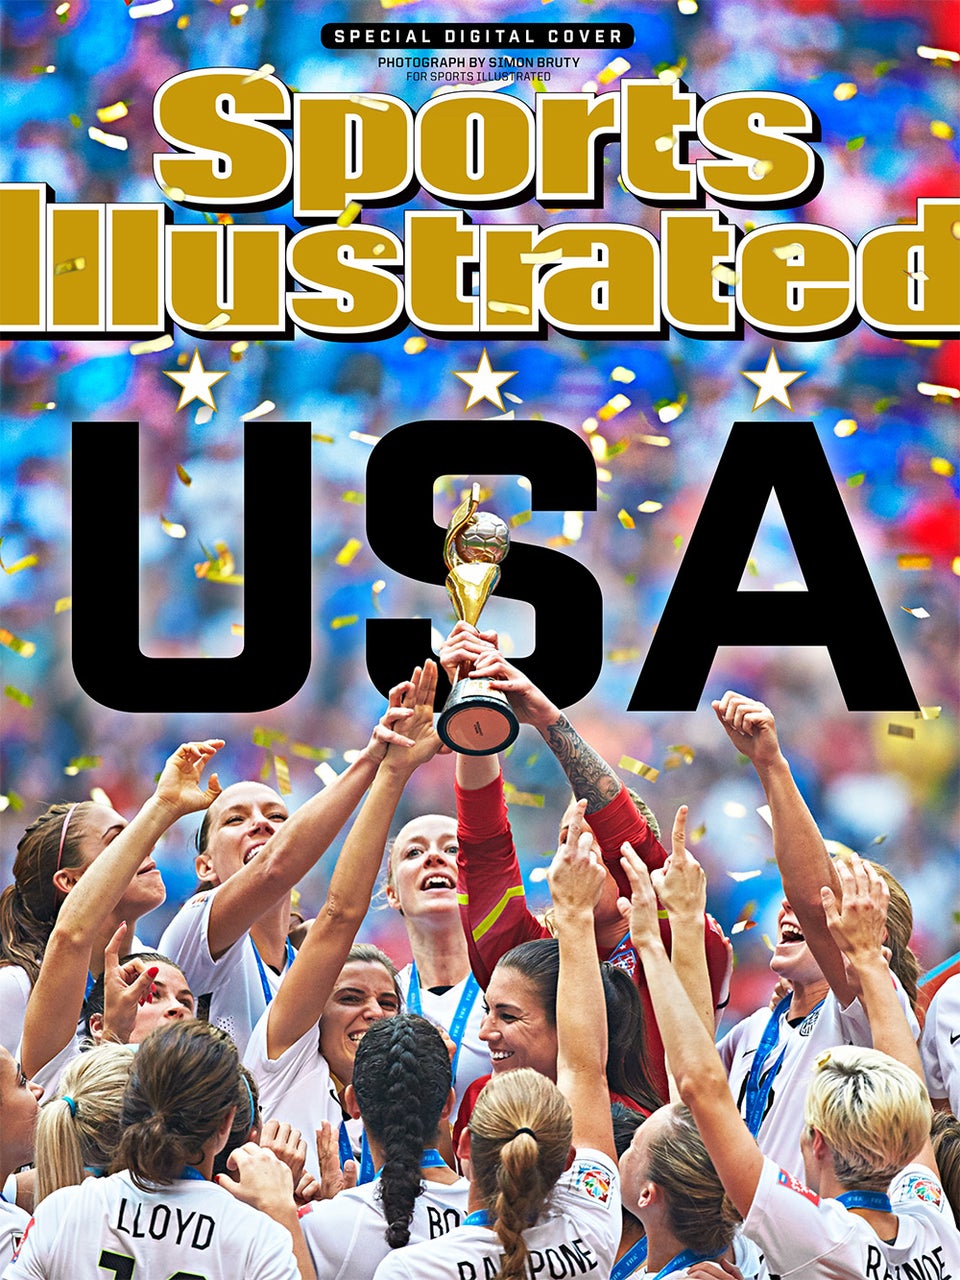 Sports Illustrated Releases Unofficial Cover Commemorating U.S. World Cup Victory